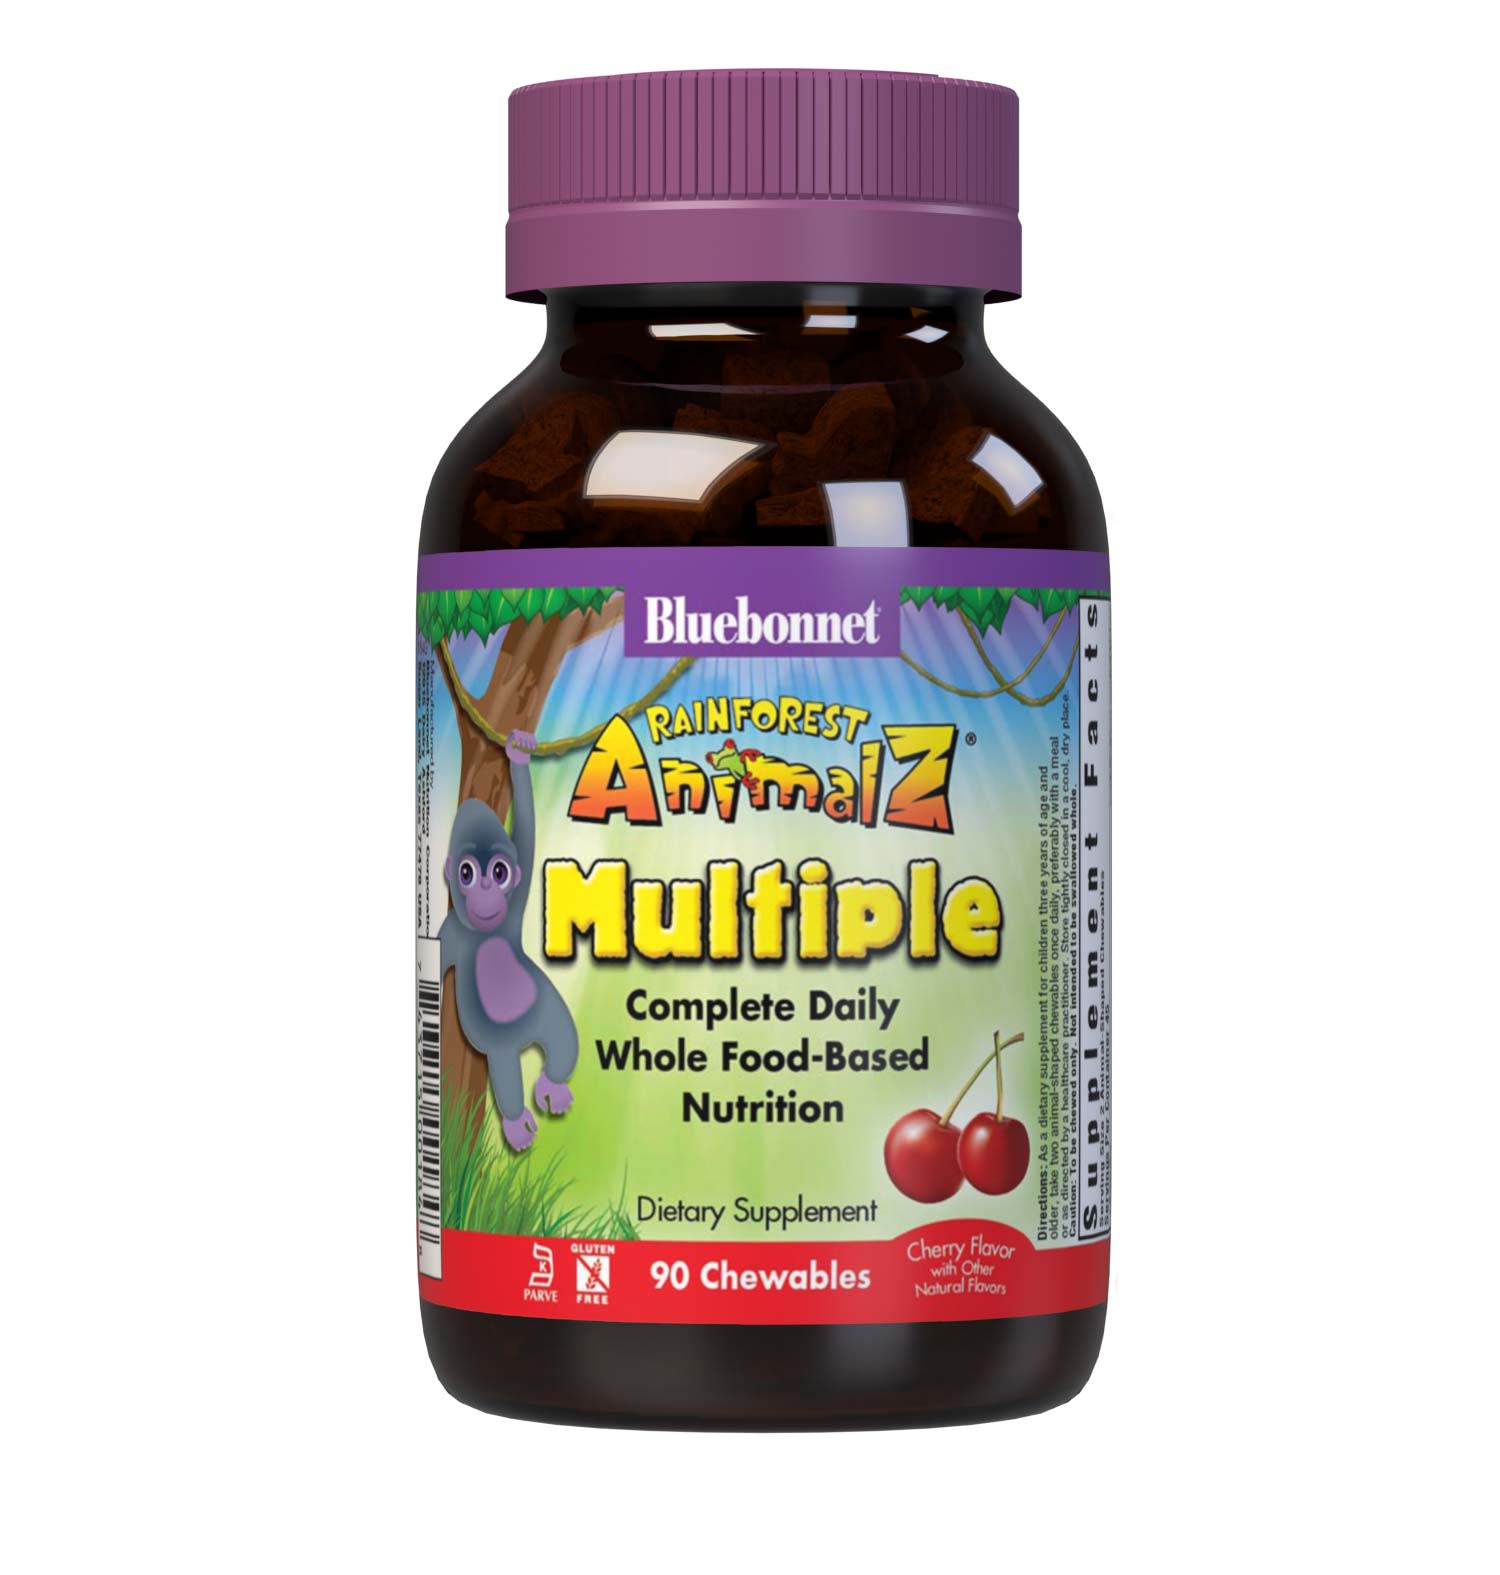 Bluebonnet Rainforest Animalz Whole Food Based Multiple 90 Animal-Shaped Chewables helps bridge the nutrient gap by providing a comprehensive blend of super fruits and veggies that are rich in essential vitamins and minerals in tasty, delicious flavored chewable tablets to support their growth and developmental needs. #size_90 count